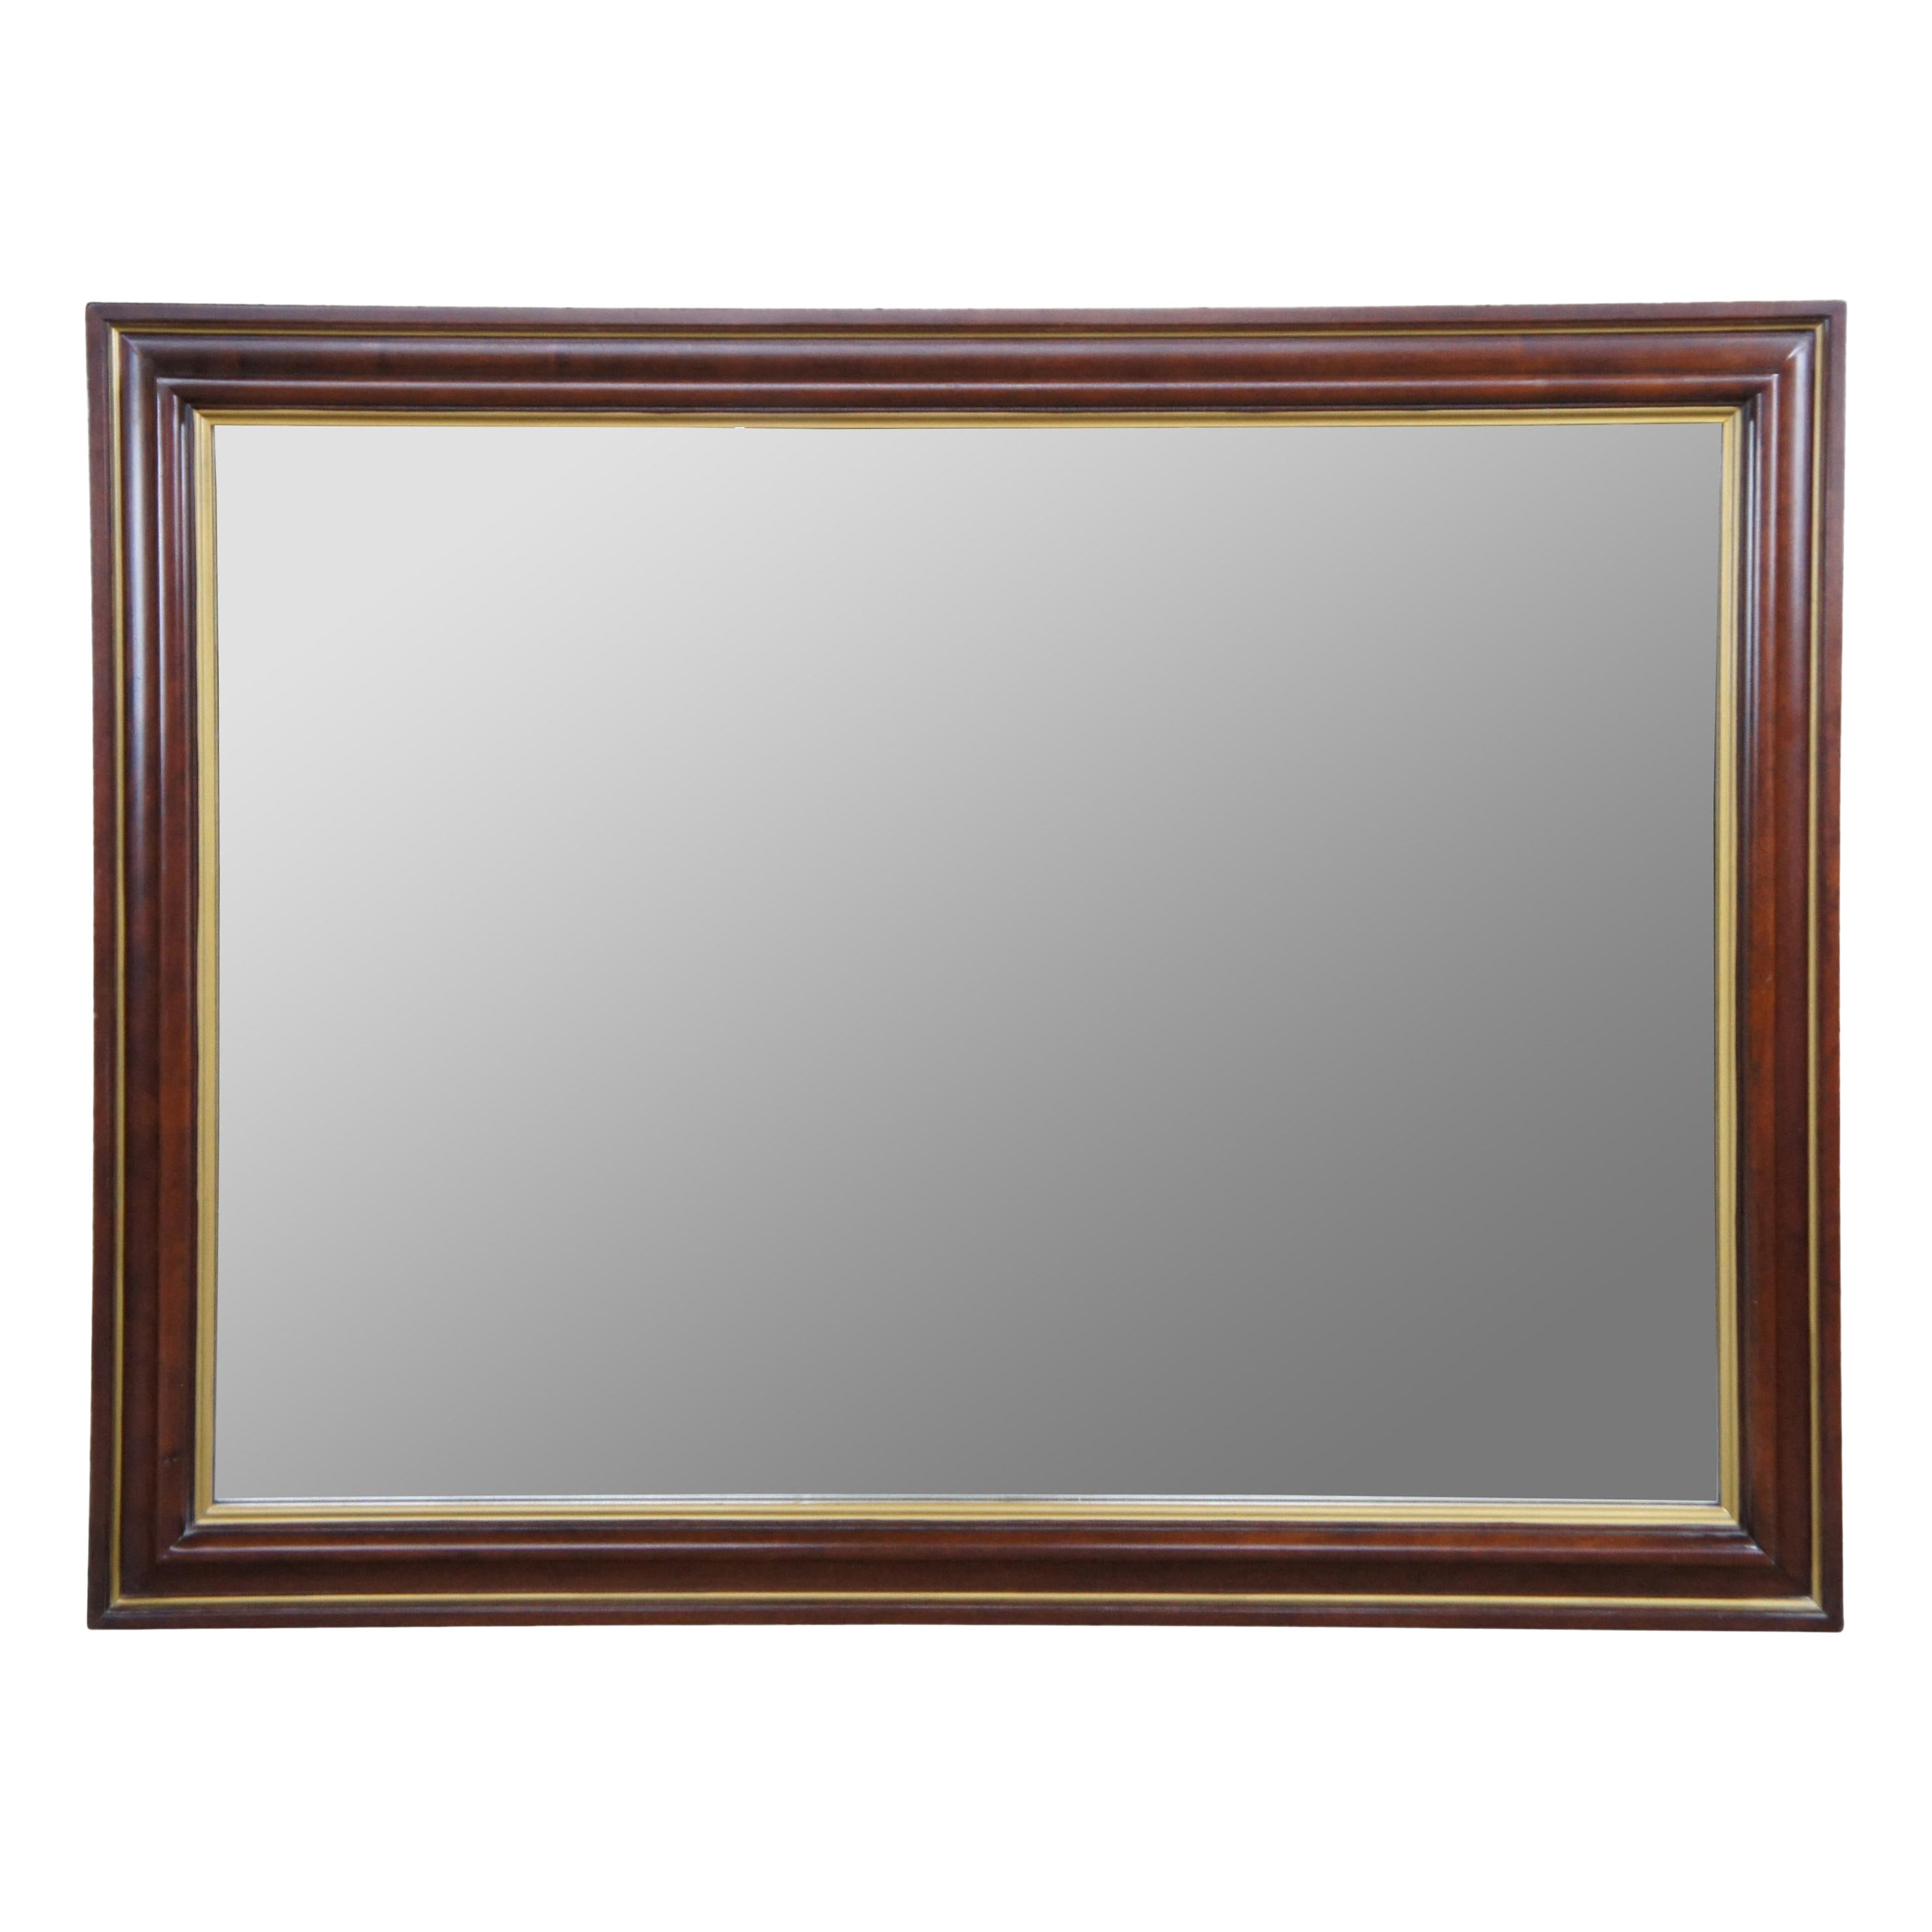 Statton Old Towne Solid Cherry Over Dresser or Wall Mirror Georgian